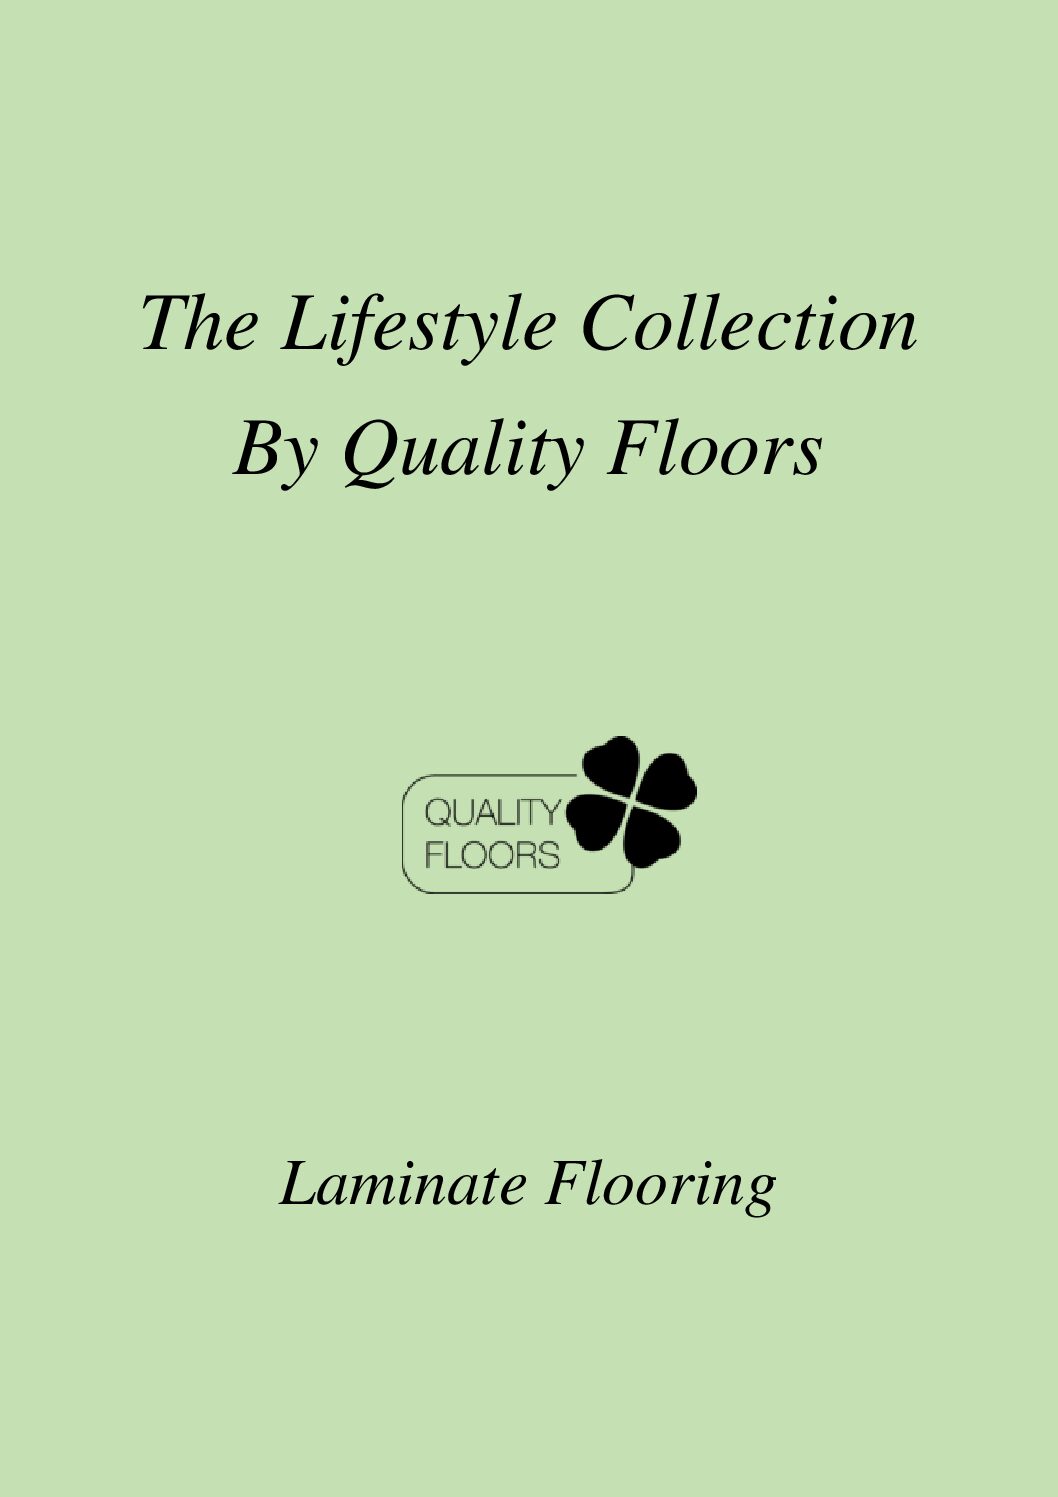 The Lifestyle Collection